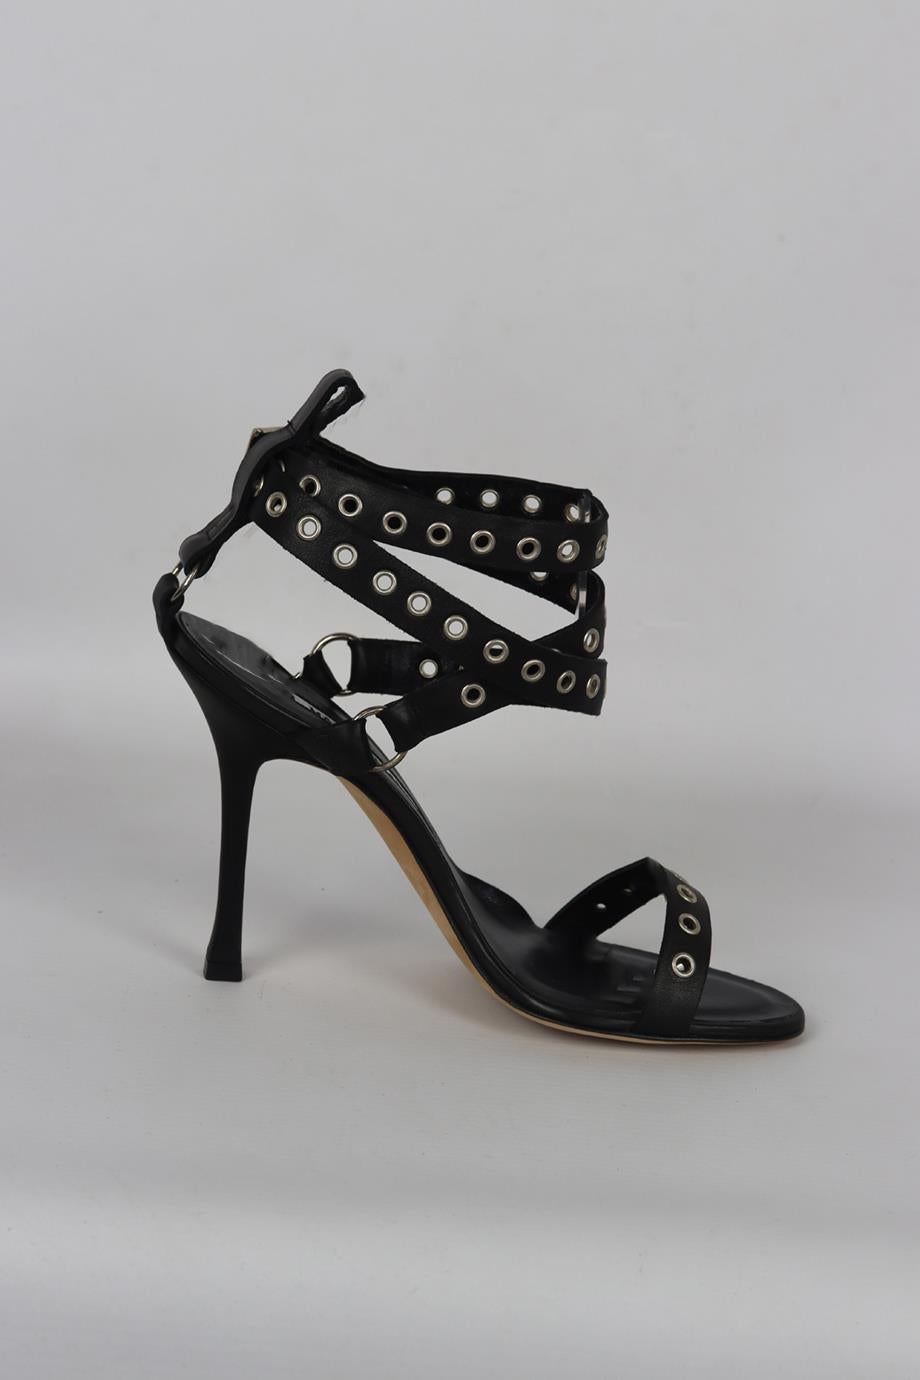 Manolo Blahnik eyelet embellished leather sandals. Black. Buckle fastening at side. Does not come with dustbag or box. Size: EU 37 (UK 4, US 7). Heel Height: 3 in. Insole: 9.1 in. New without box